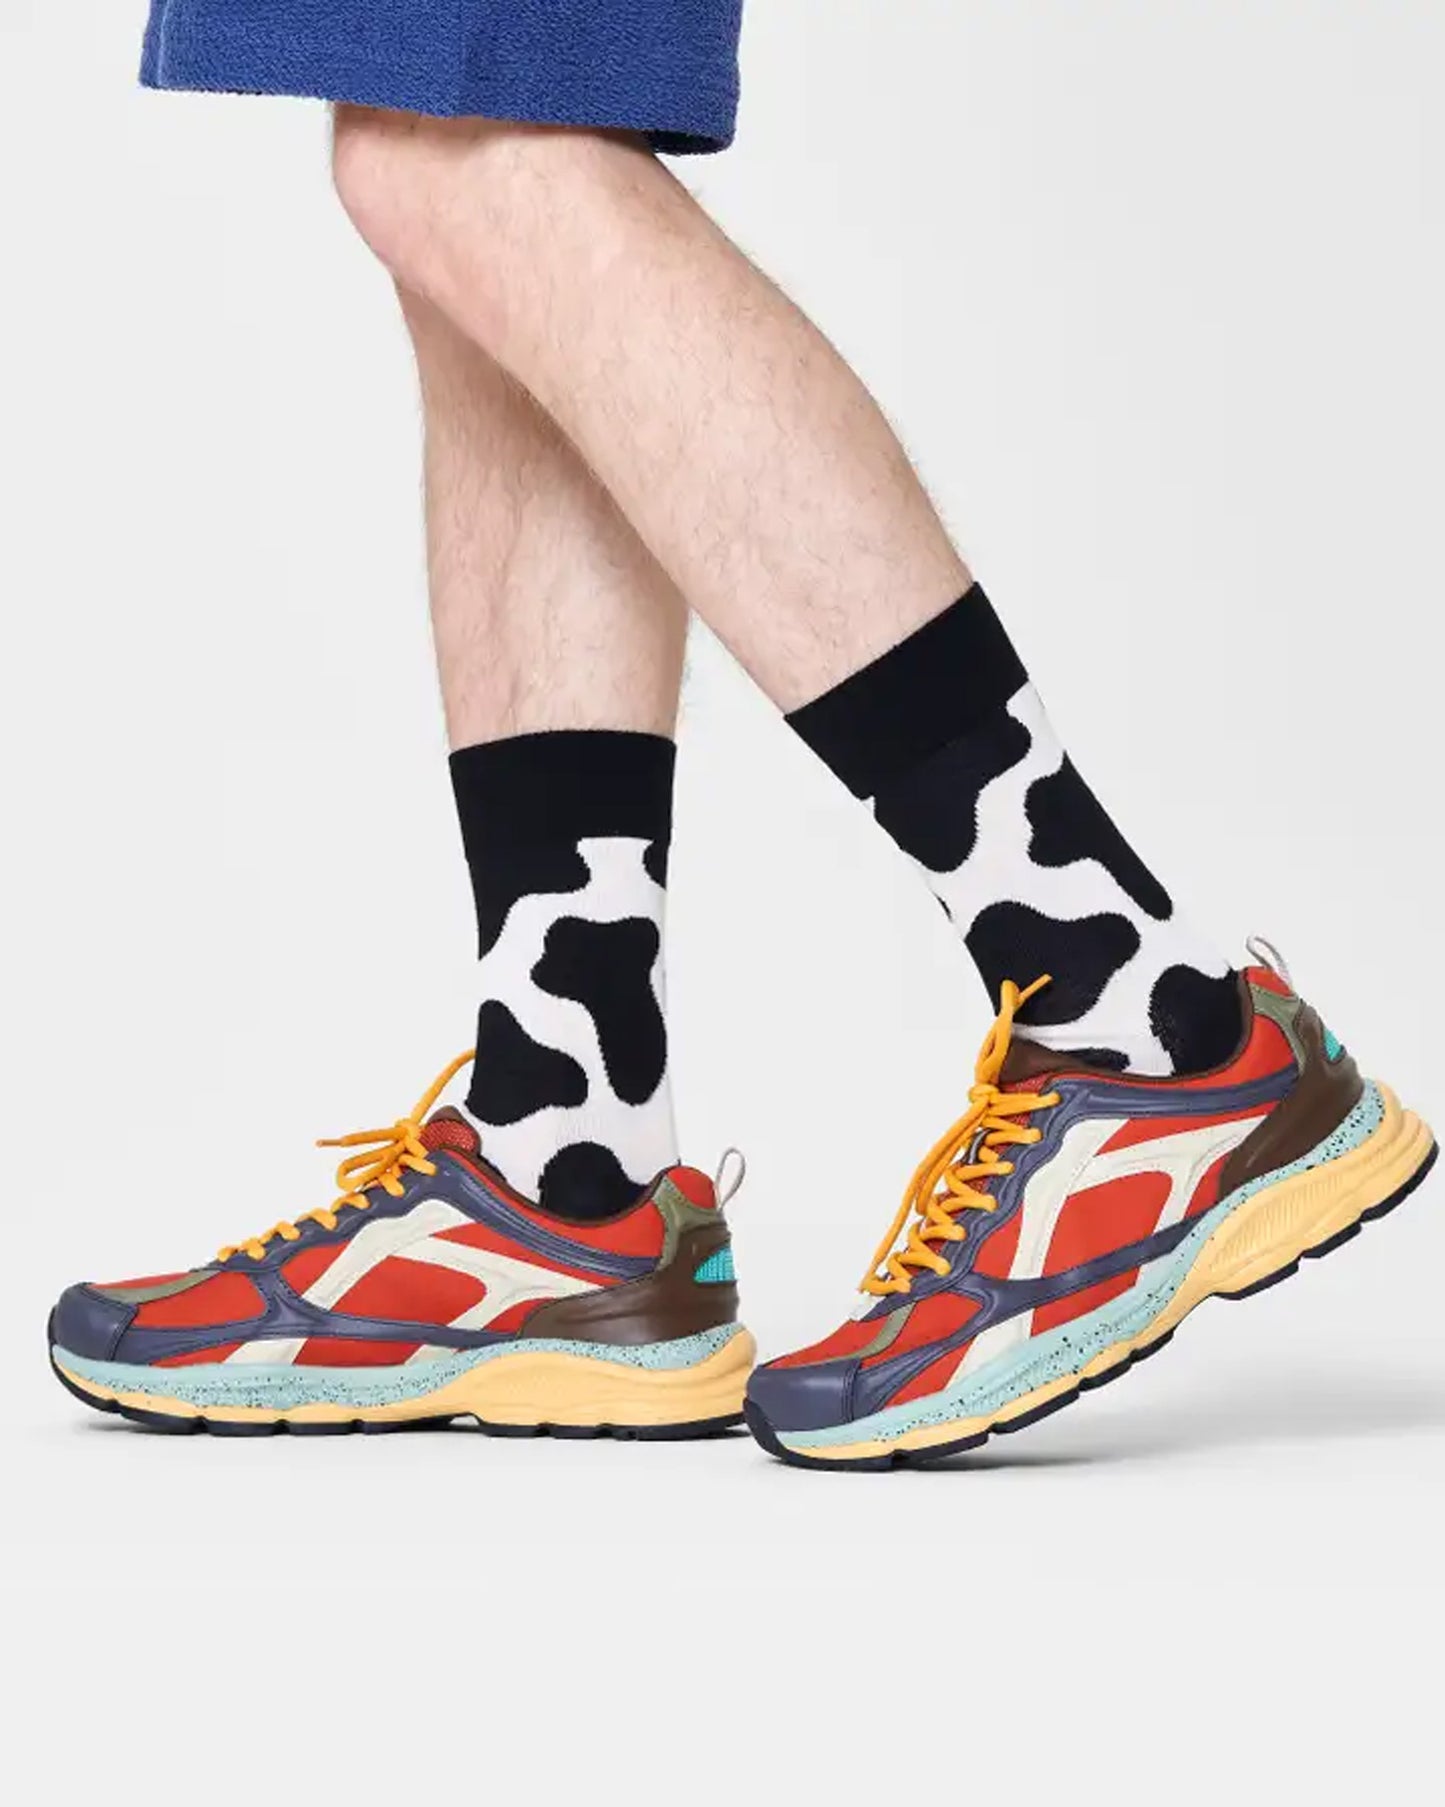 Happy Socks COW01-9300 Cow Sock - Cream cotton mix crew length ankle socks with a black cow print pattern and black cuff, worn by a man wearing trainers and shorts